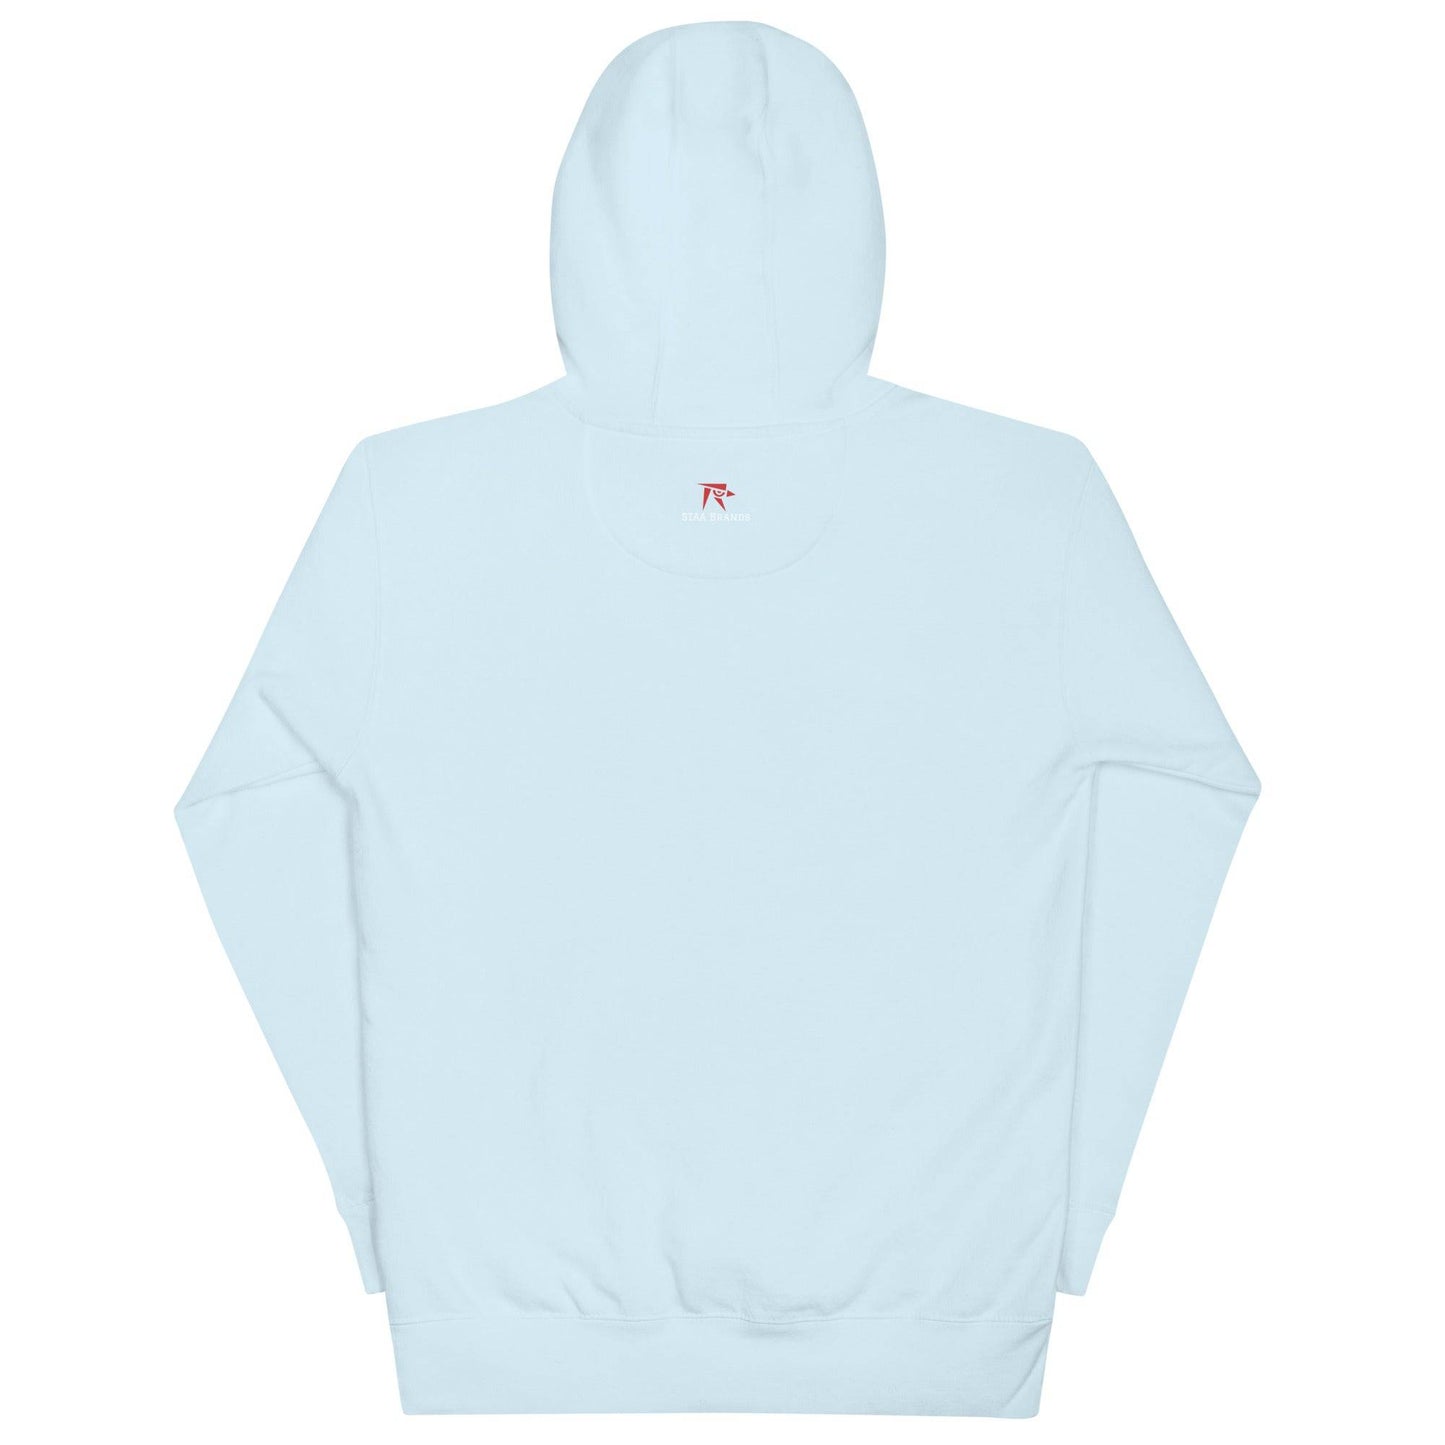 a white sweatshirt with a red logo on the chest